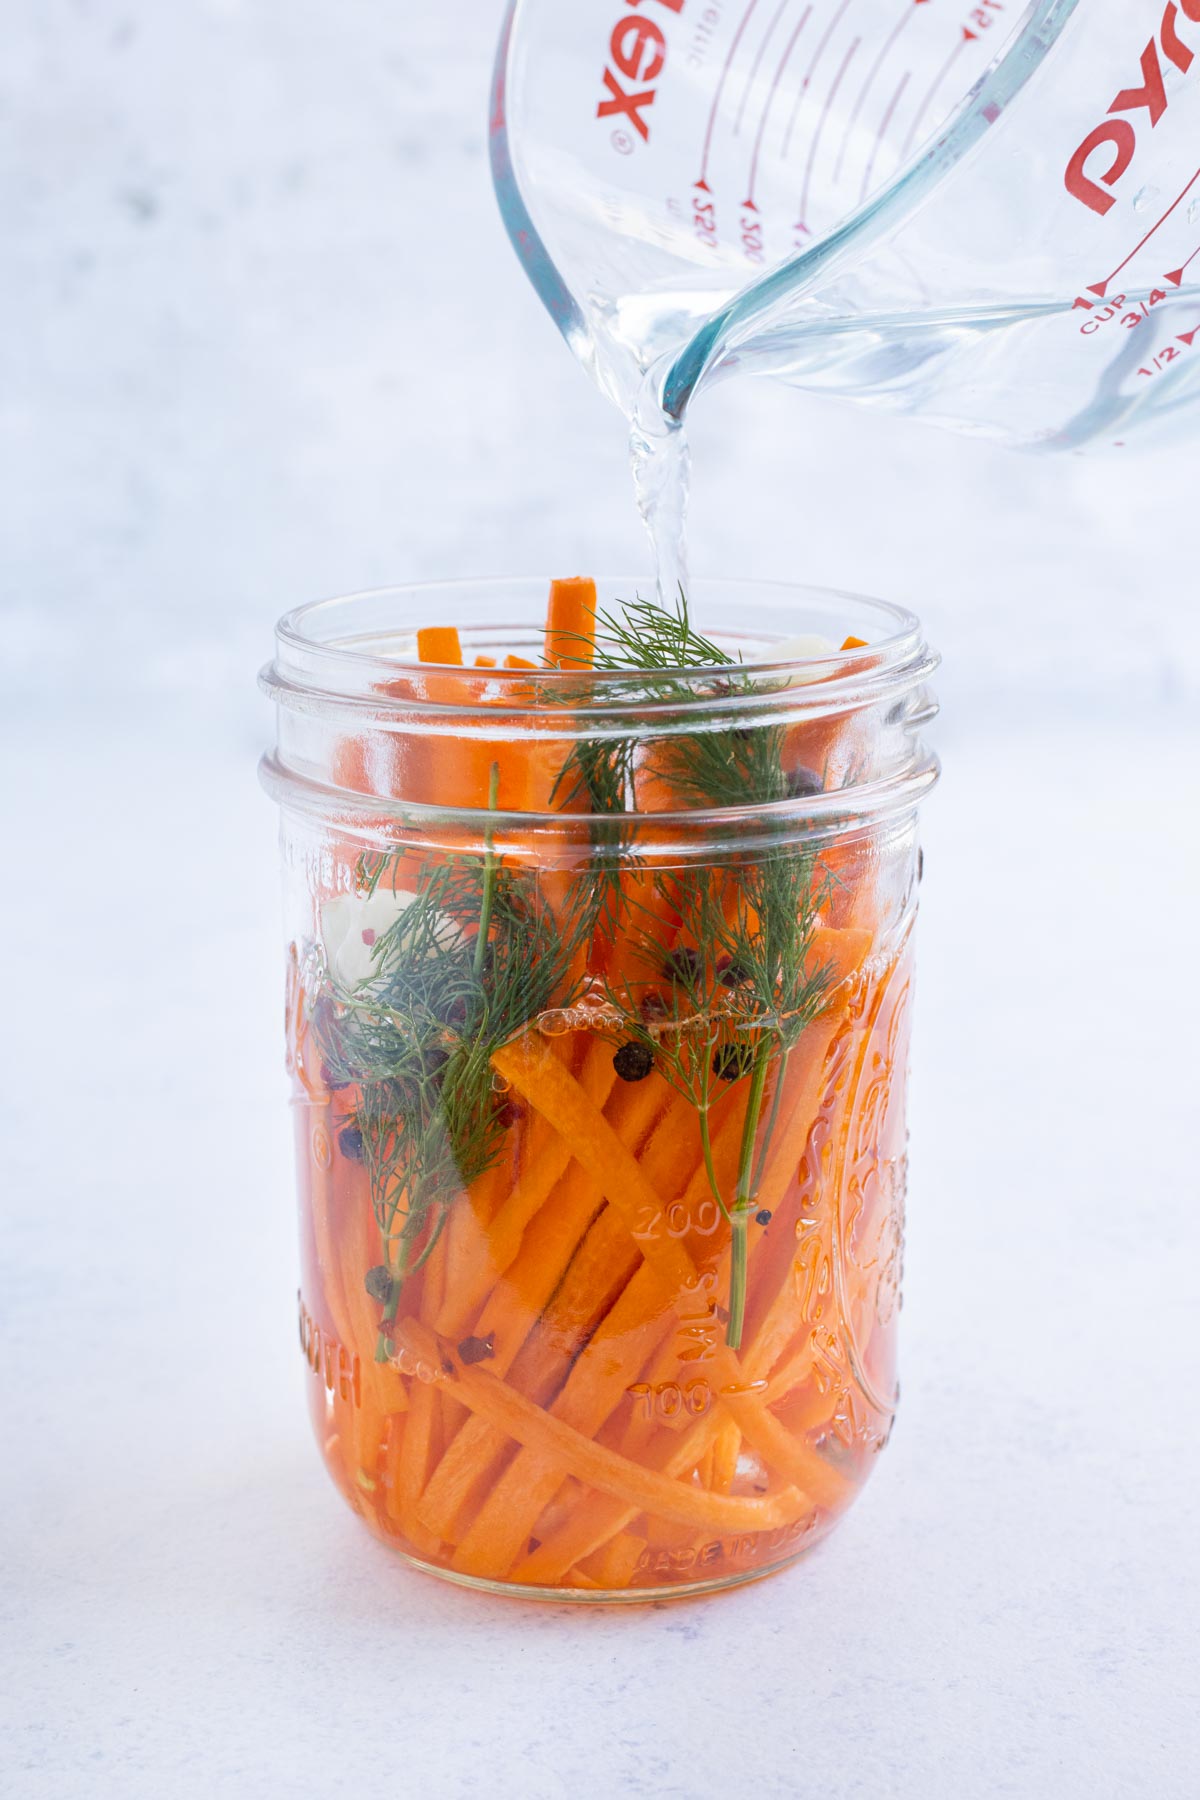 Brining solution is poured over carrots in a jar.